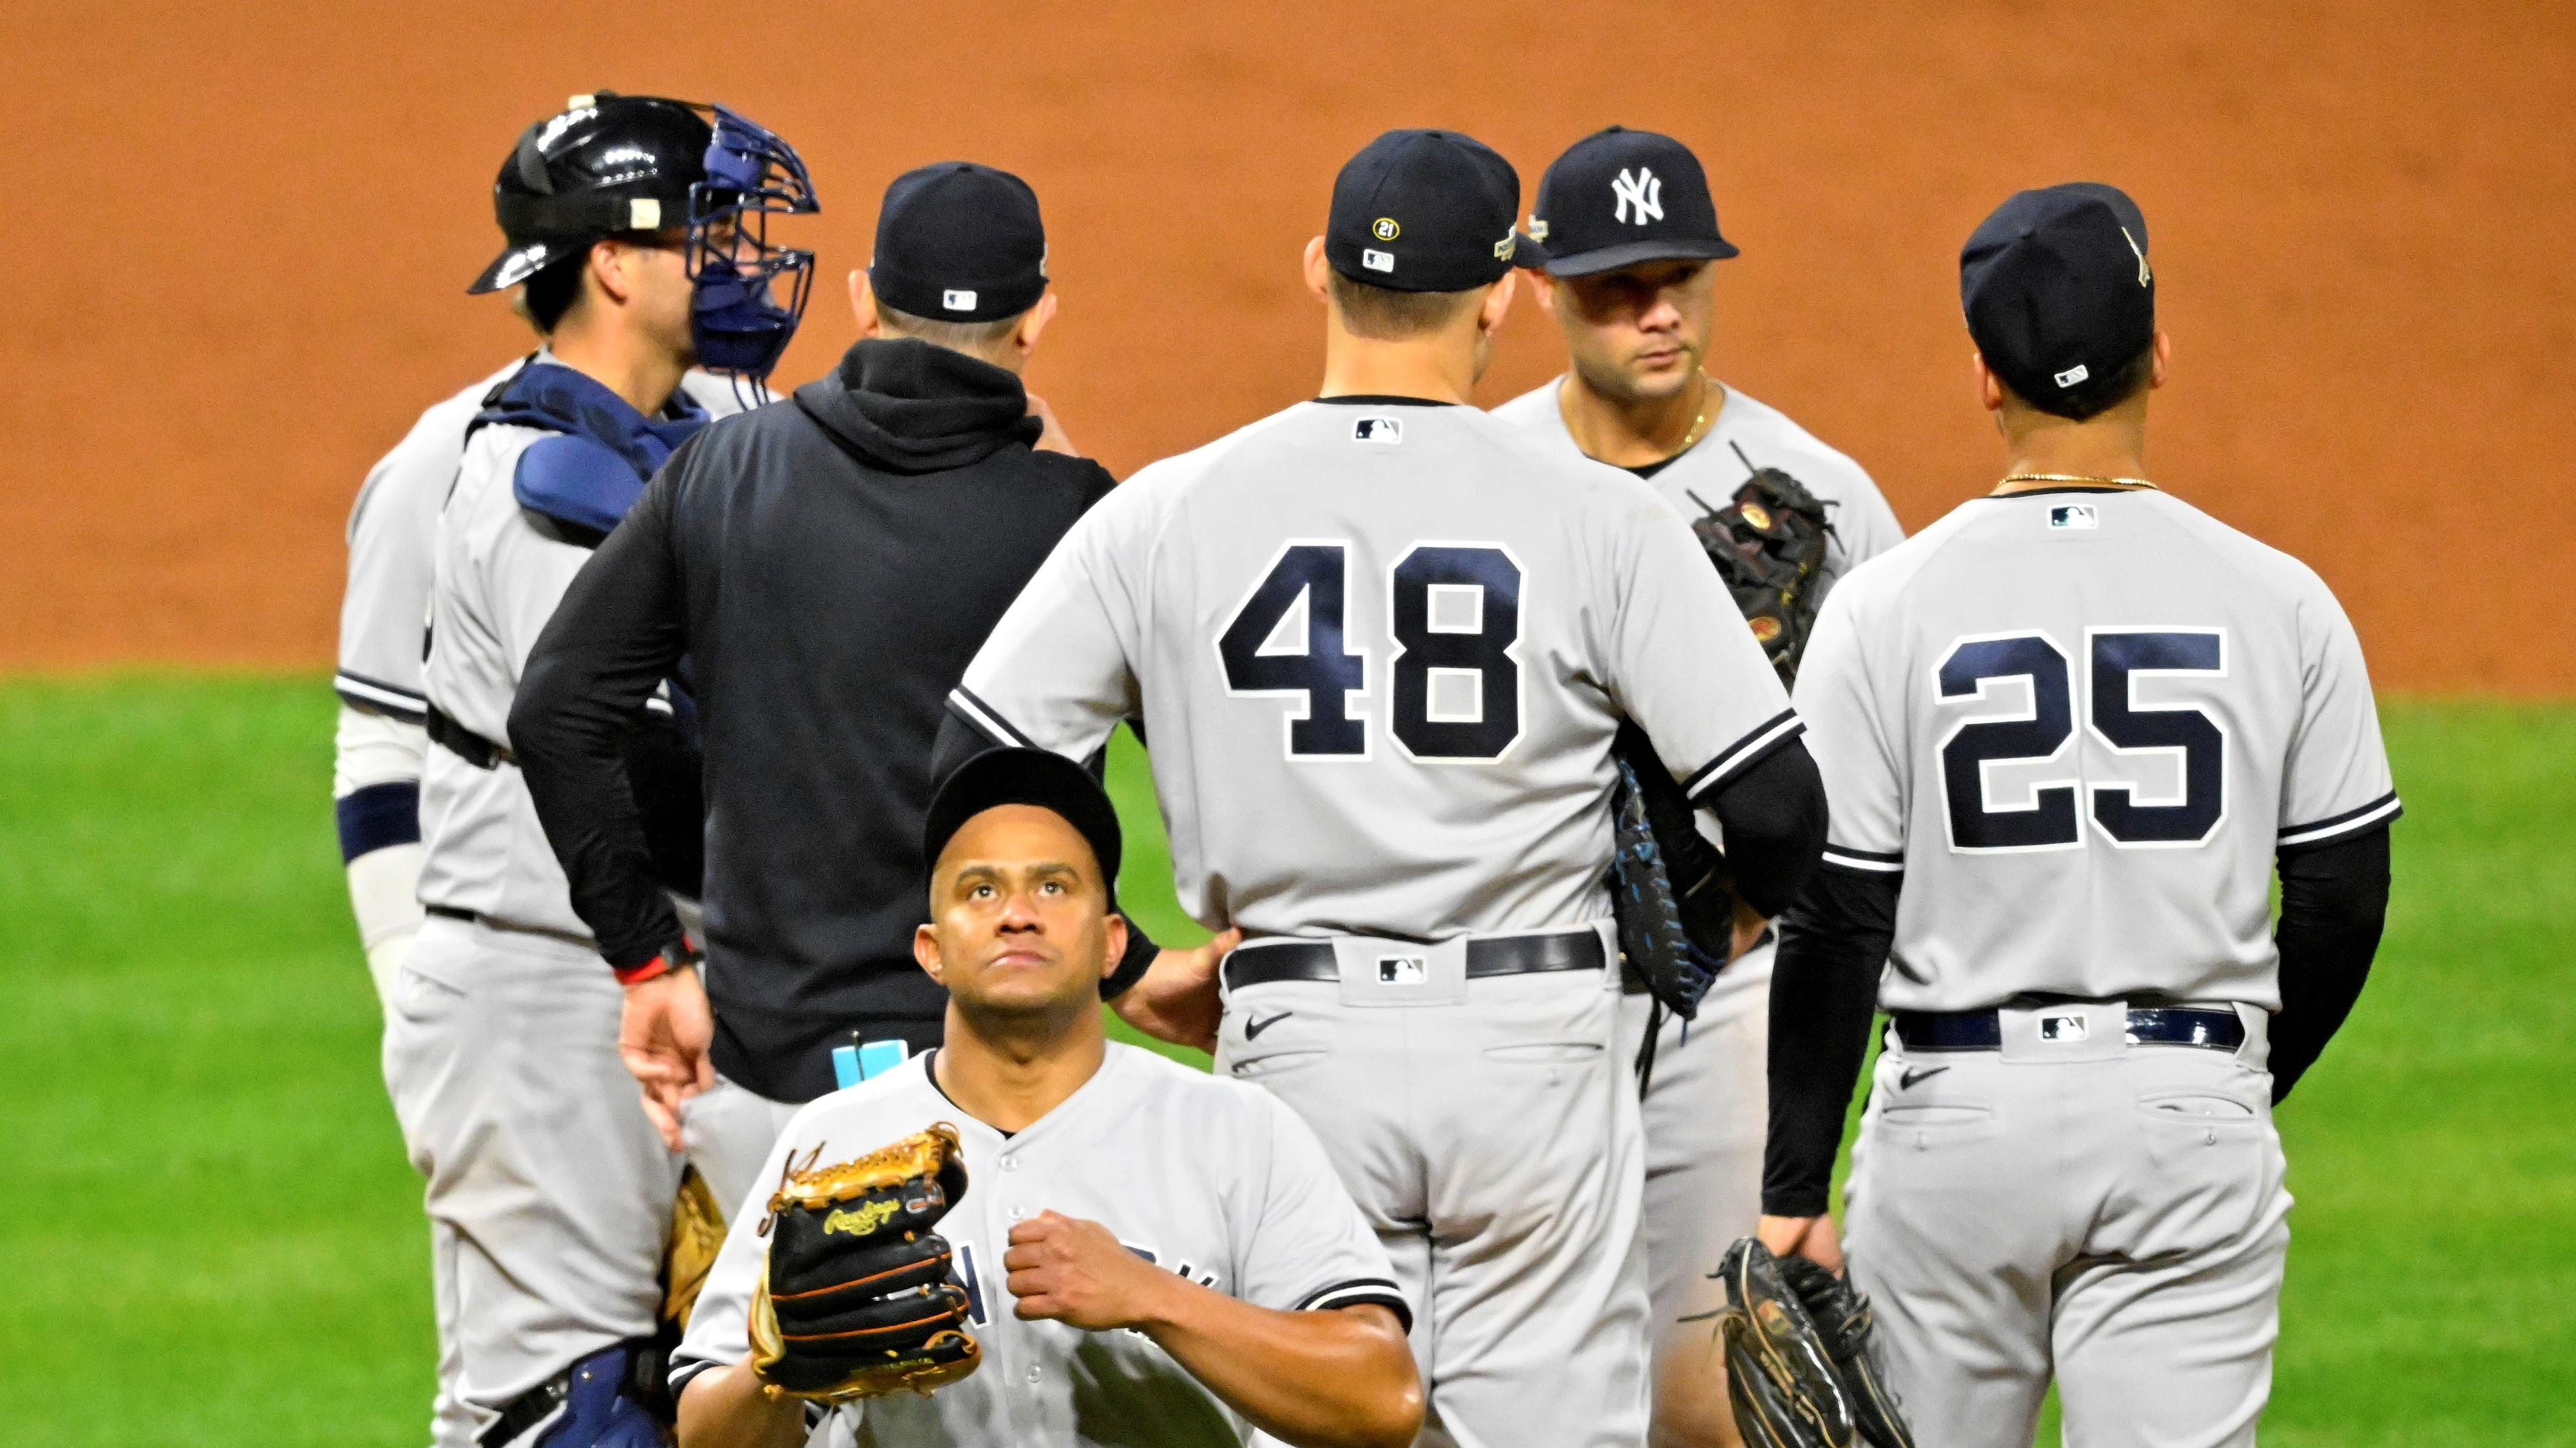 Oct 15, 2022; Cleveland, Ohio, USA; New York Yankees relief pitcher Wandy Peralta (58) walks off the mound after a pitching change against the Cleveland Guardians in the ninth inning during game three of the NLDS for the 2022 MLB Playoffs at Progressive Field. Mandatory Credit: David Richard-USA TODAY Sports / © David Richard-USA TODAY Sports